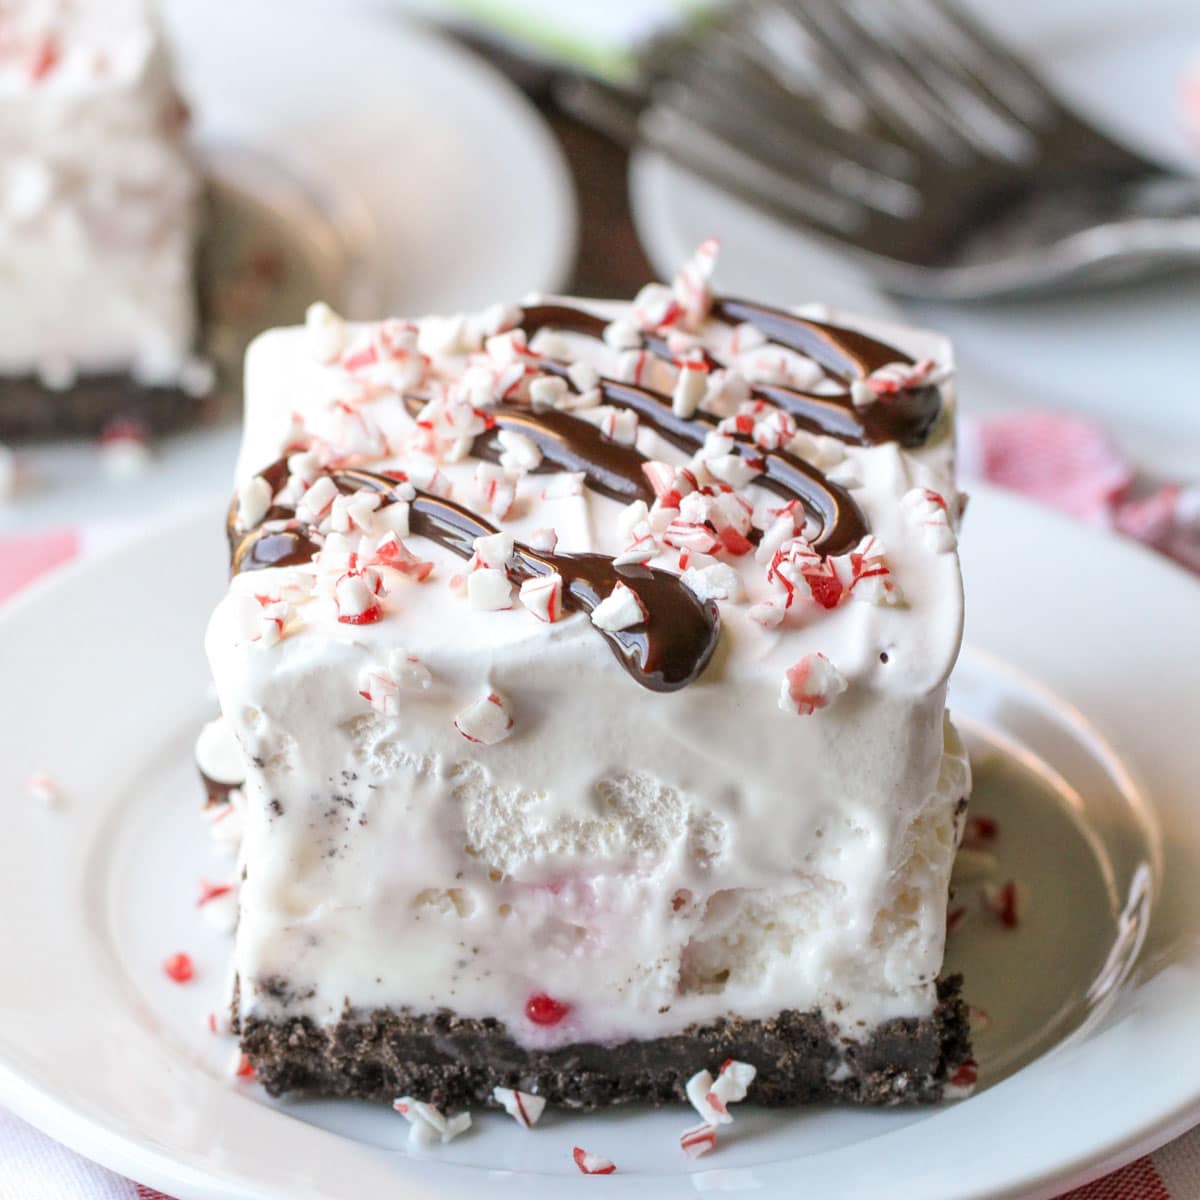 Christmas dinner ideas - square of peppermint ice cream dessert topped with crushed candy canes.